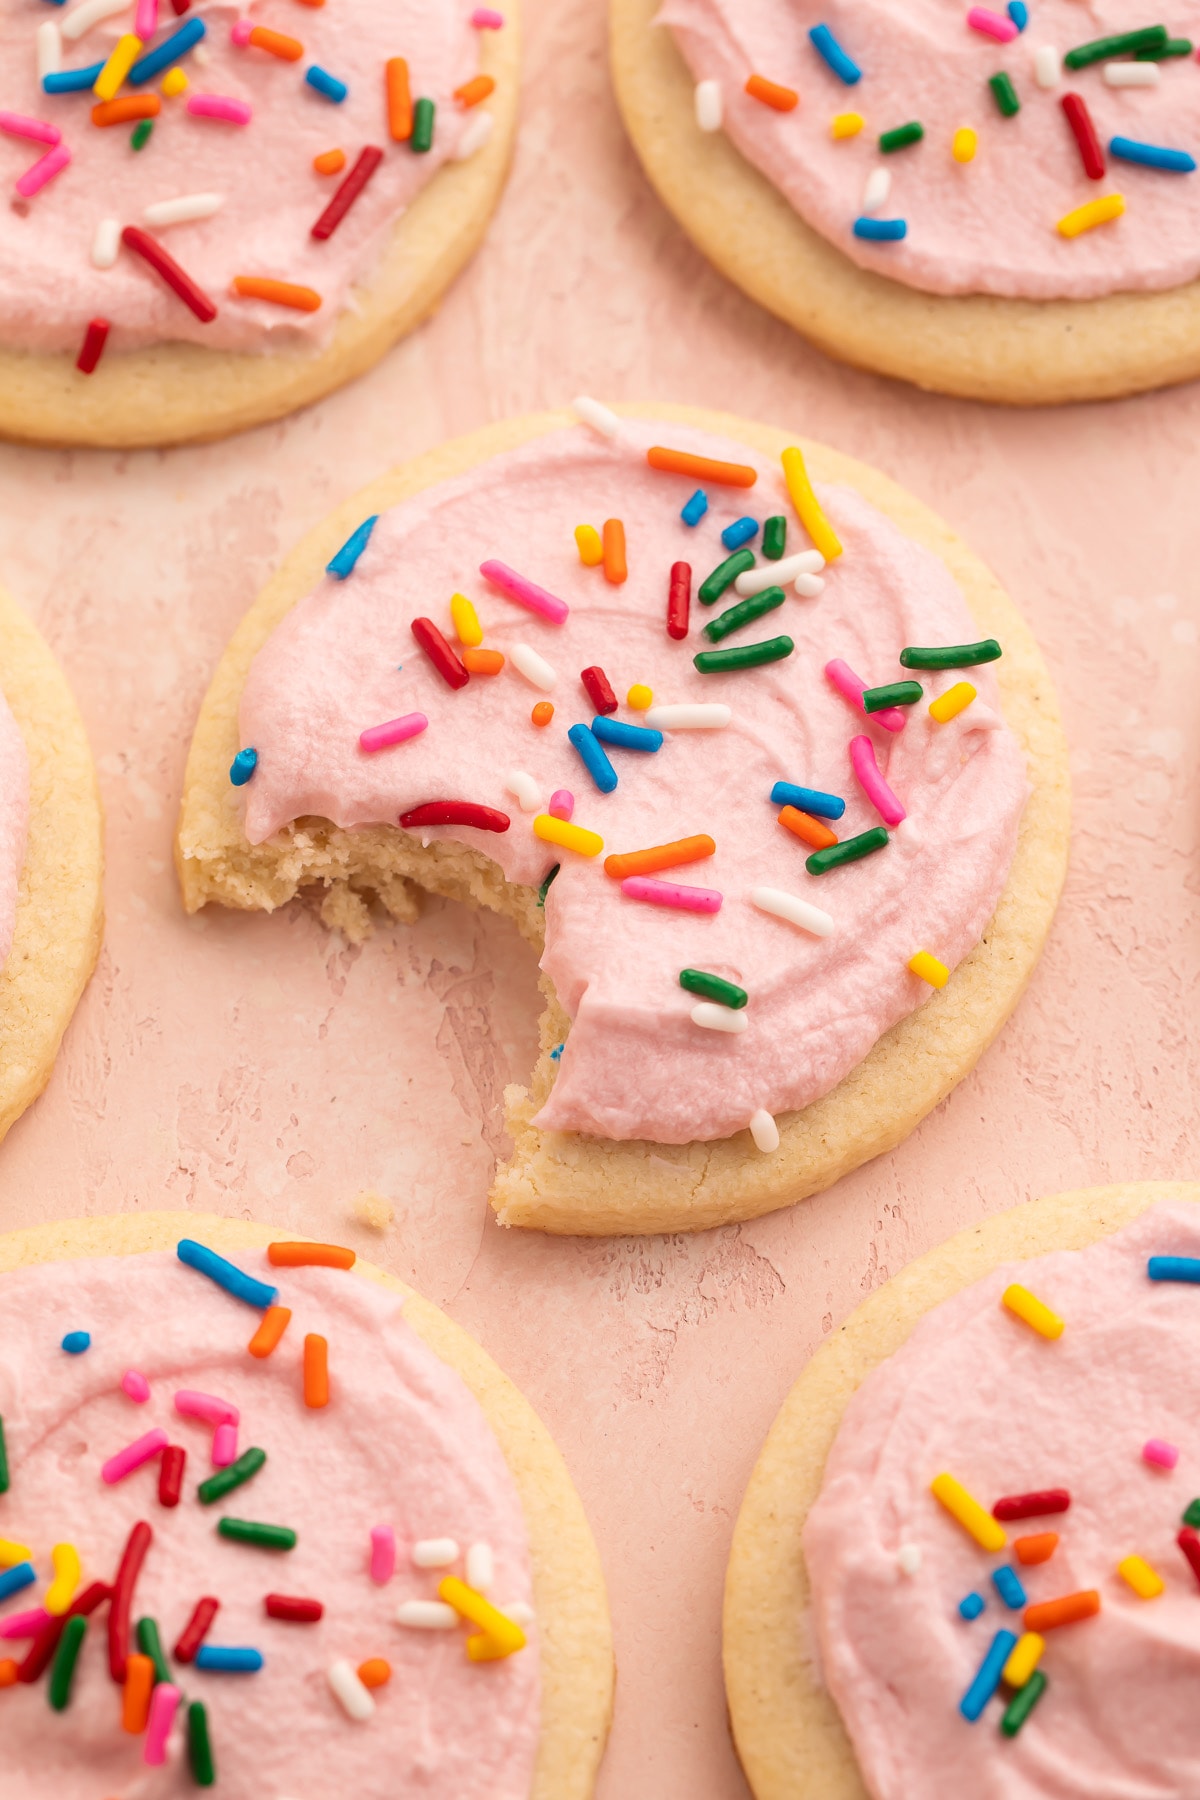 Rows of gluten free sugar cookies topped with pink buttercream frosting and rainbow jimmies on parchment paper. One bite is missing from the cookie in the center of the photo.